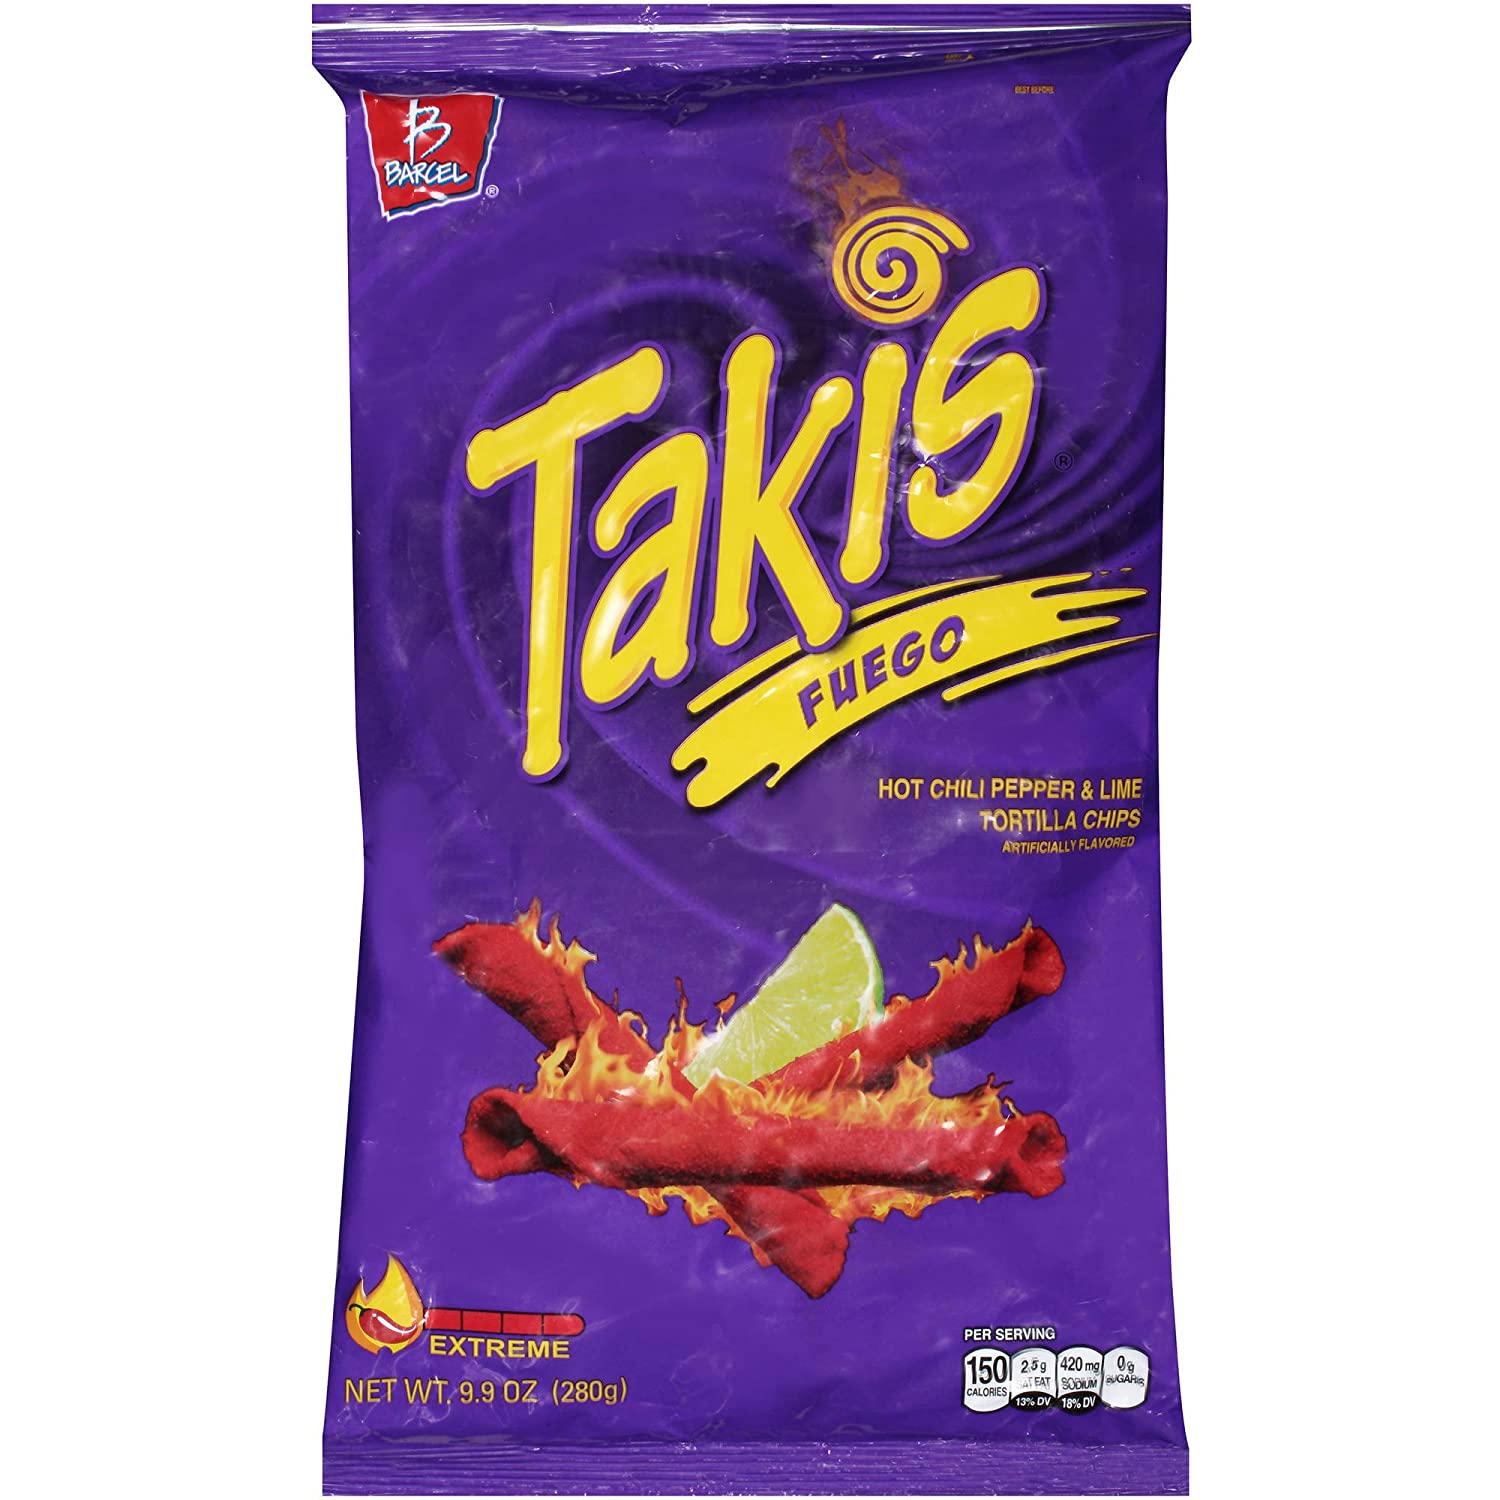 Takis Fuego Chili Pepper and Lime Tortilla Chips 9.9oz (113gm)